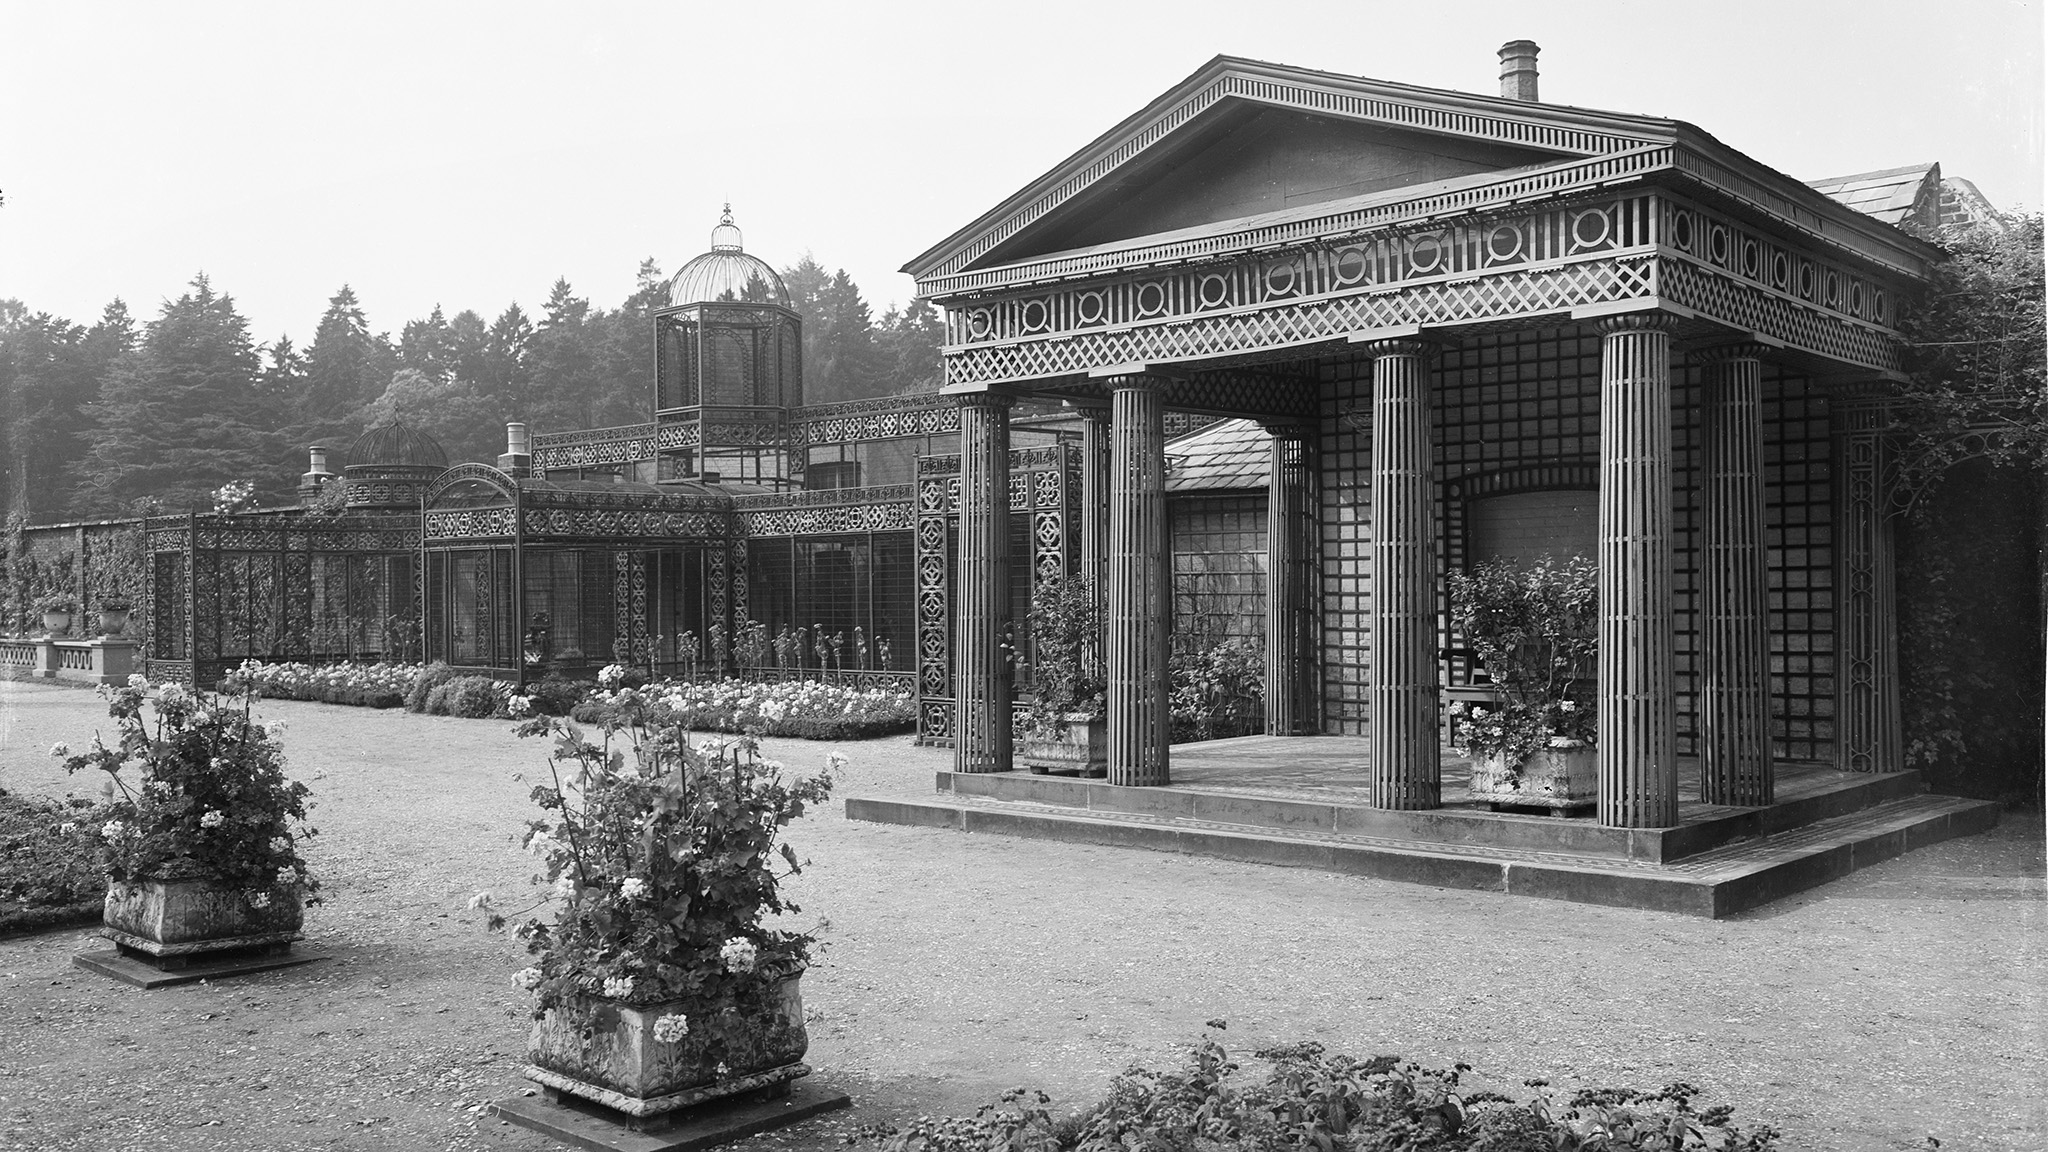 archive black and white photograph of a classical style colonnaded garden building and an elaborate wrought-iron aviary